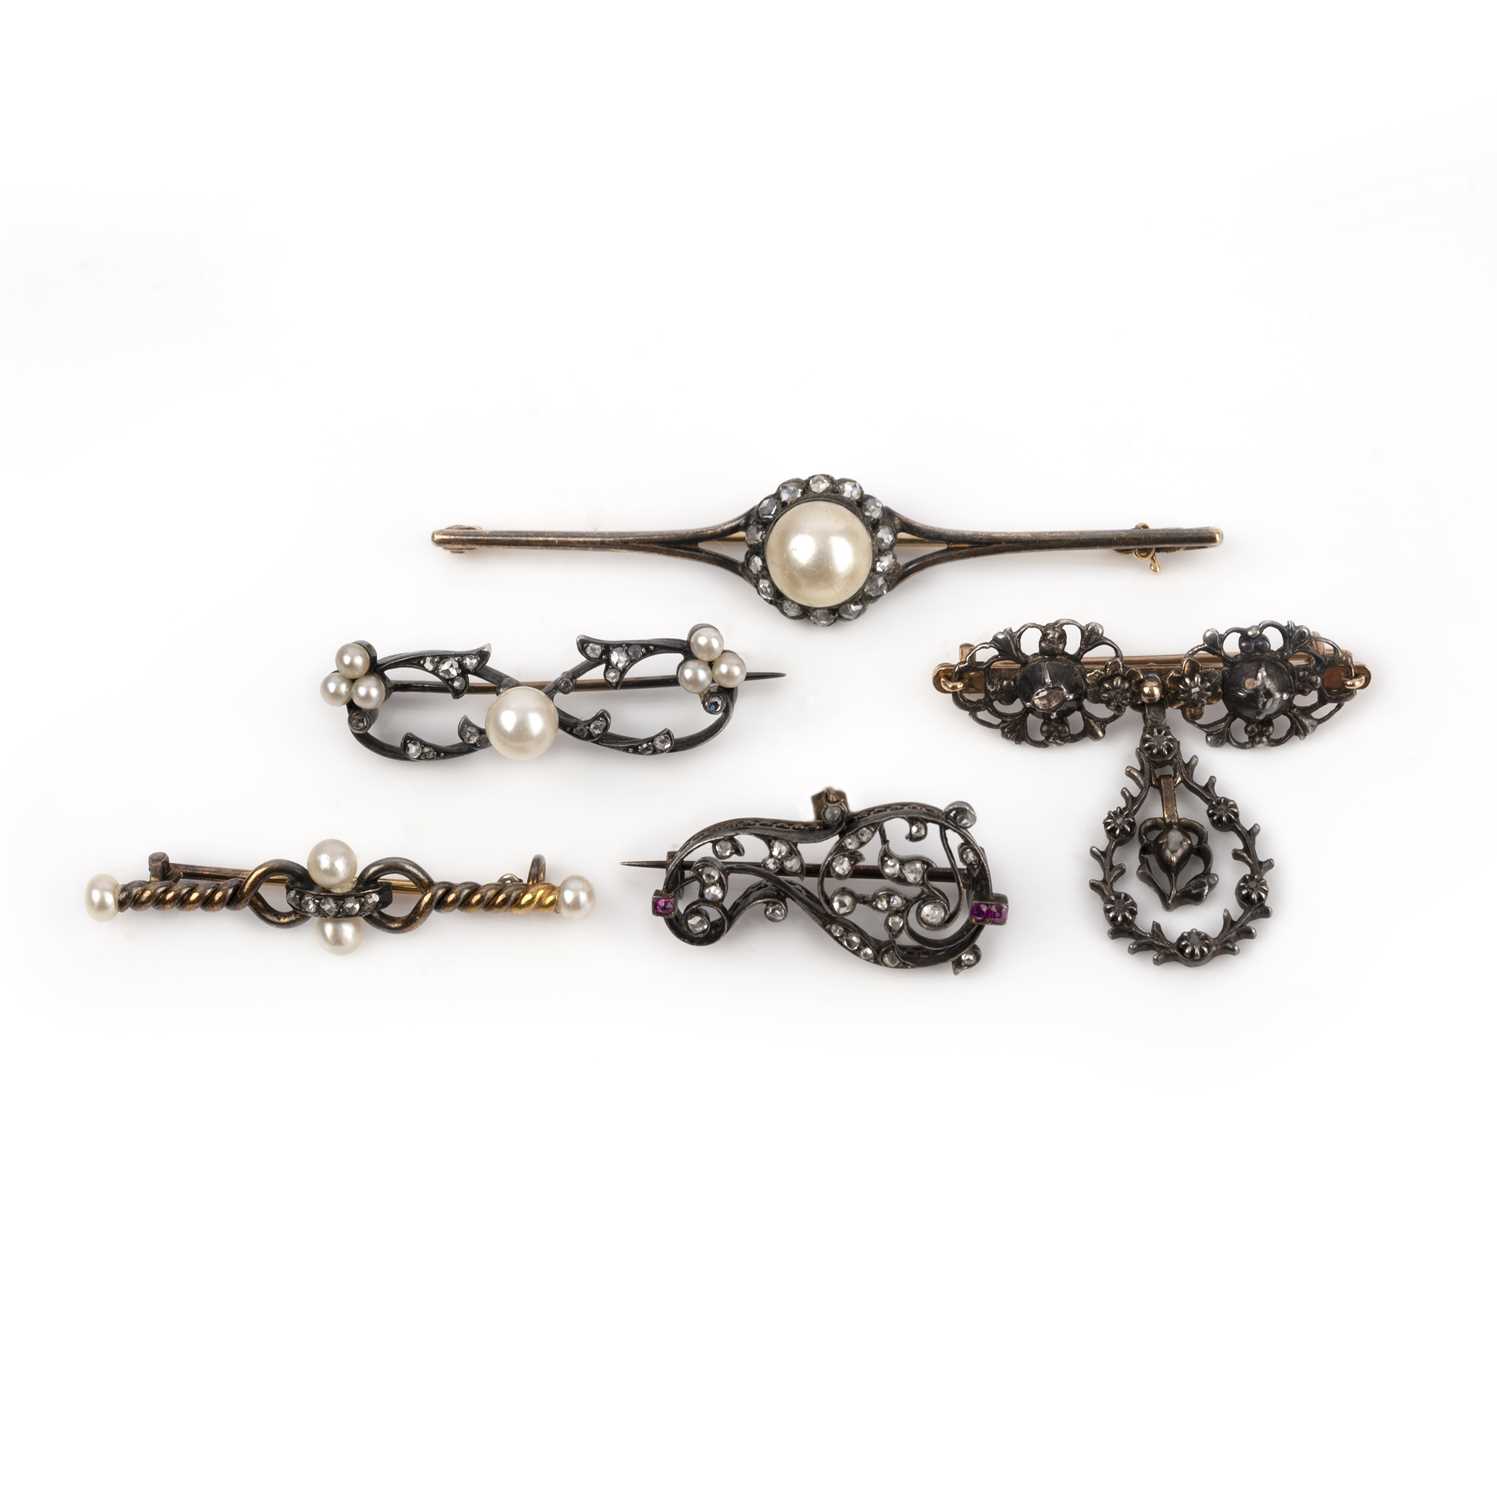 A group of five pearl and diamond brooches, 19th and early 20th century, comprising: a broch of